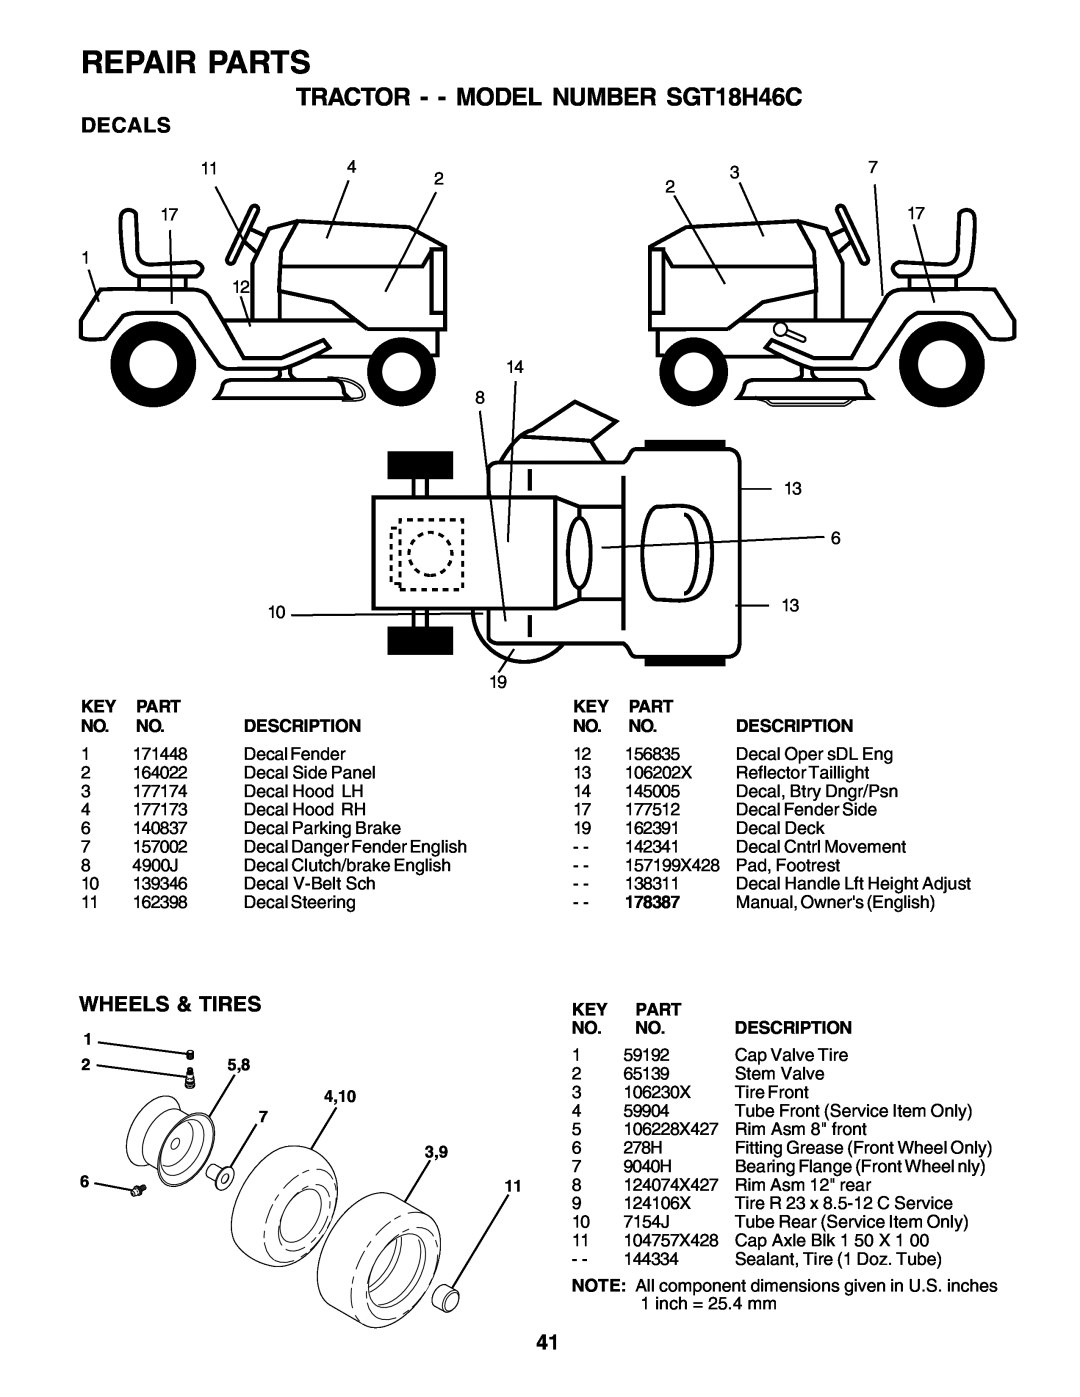 Weed Eater manual Repair Parts, TRACTOR - - MODEL NUMBER SGT18H46C, Decals, Wheels & Tires, 4,10 